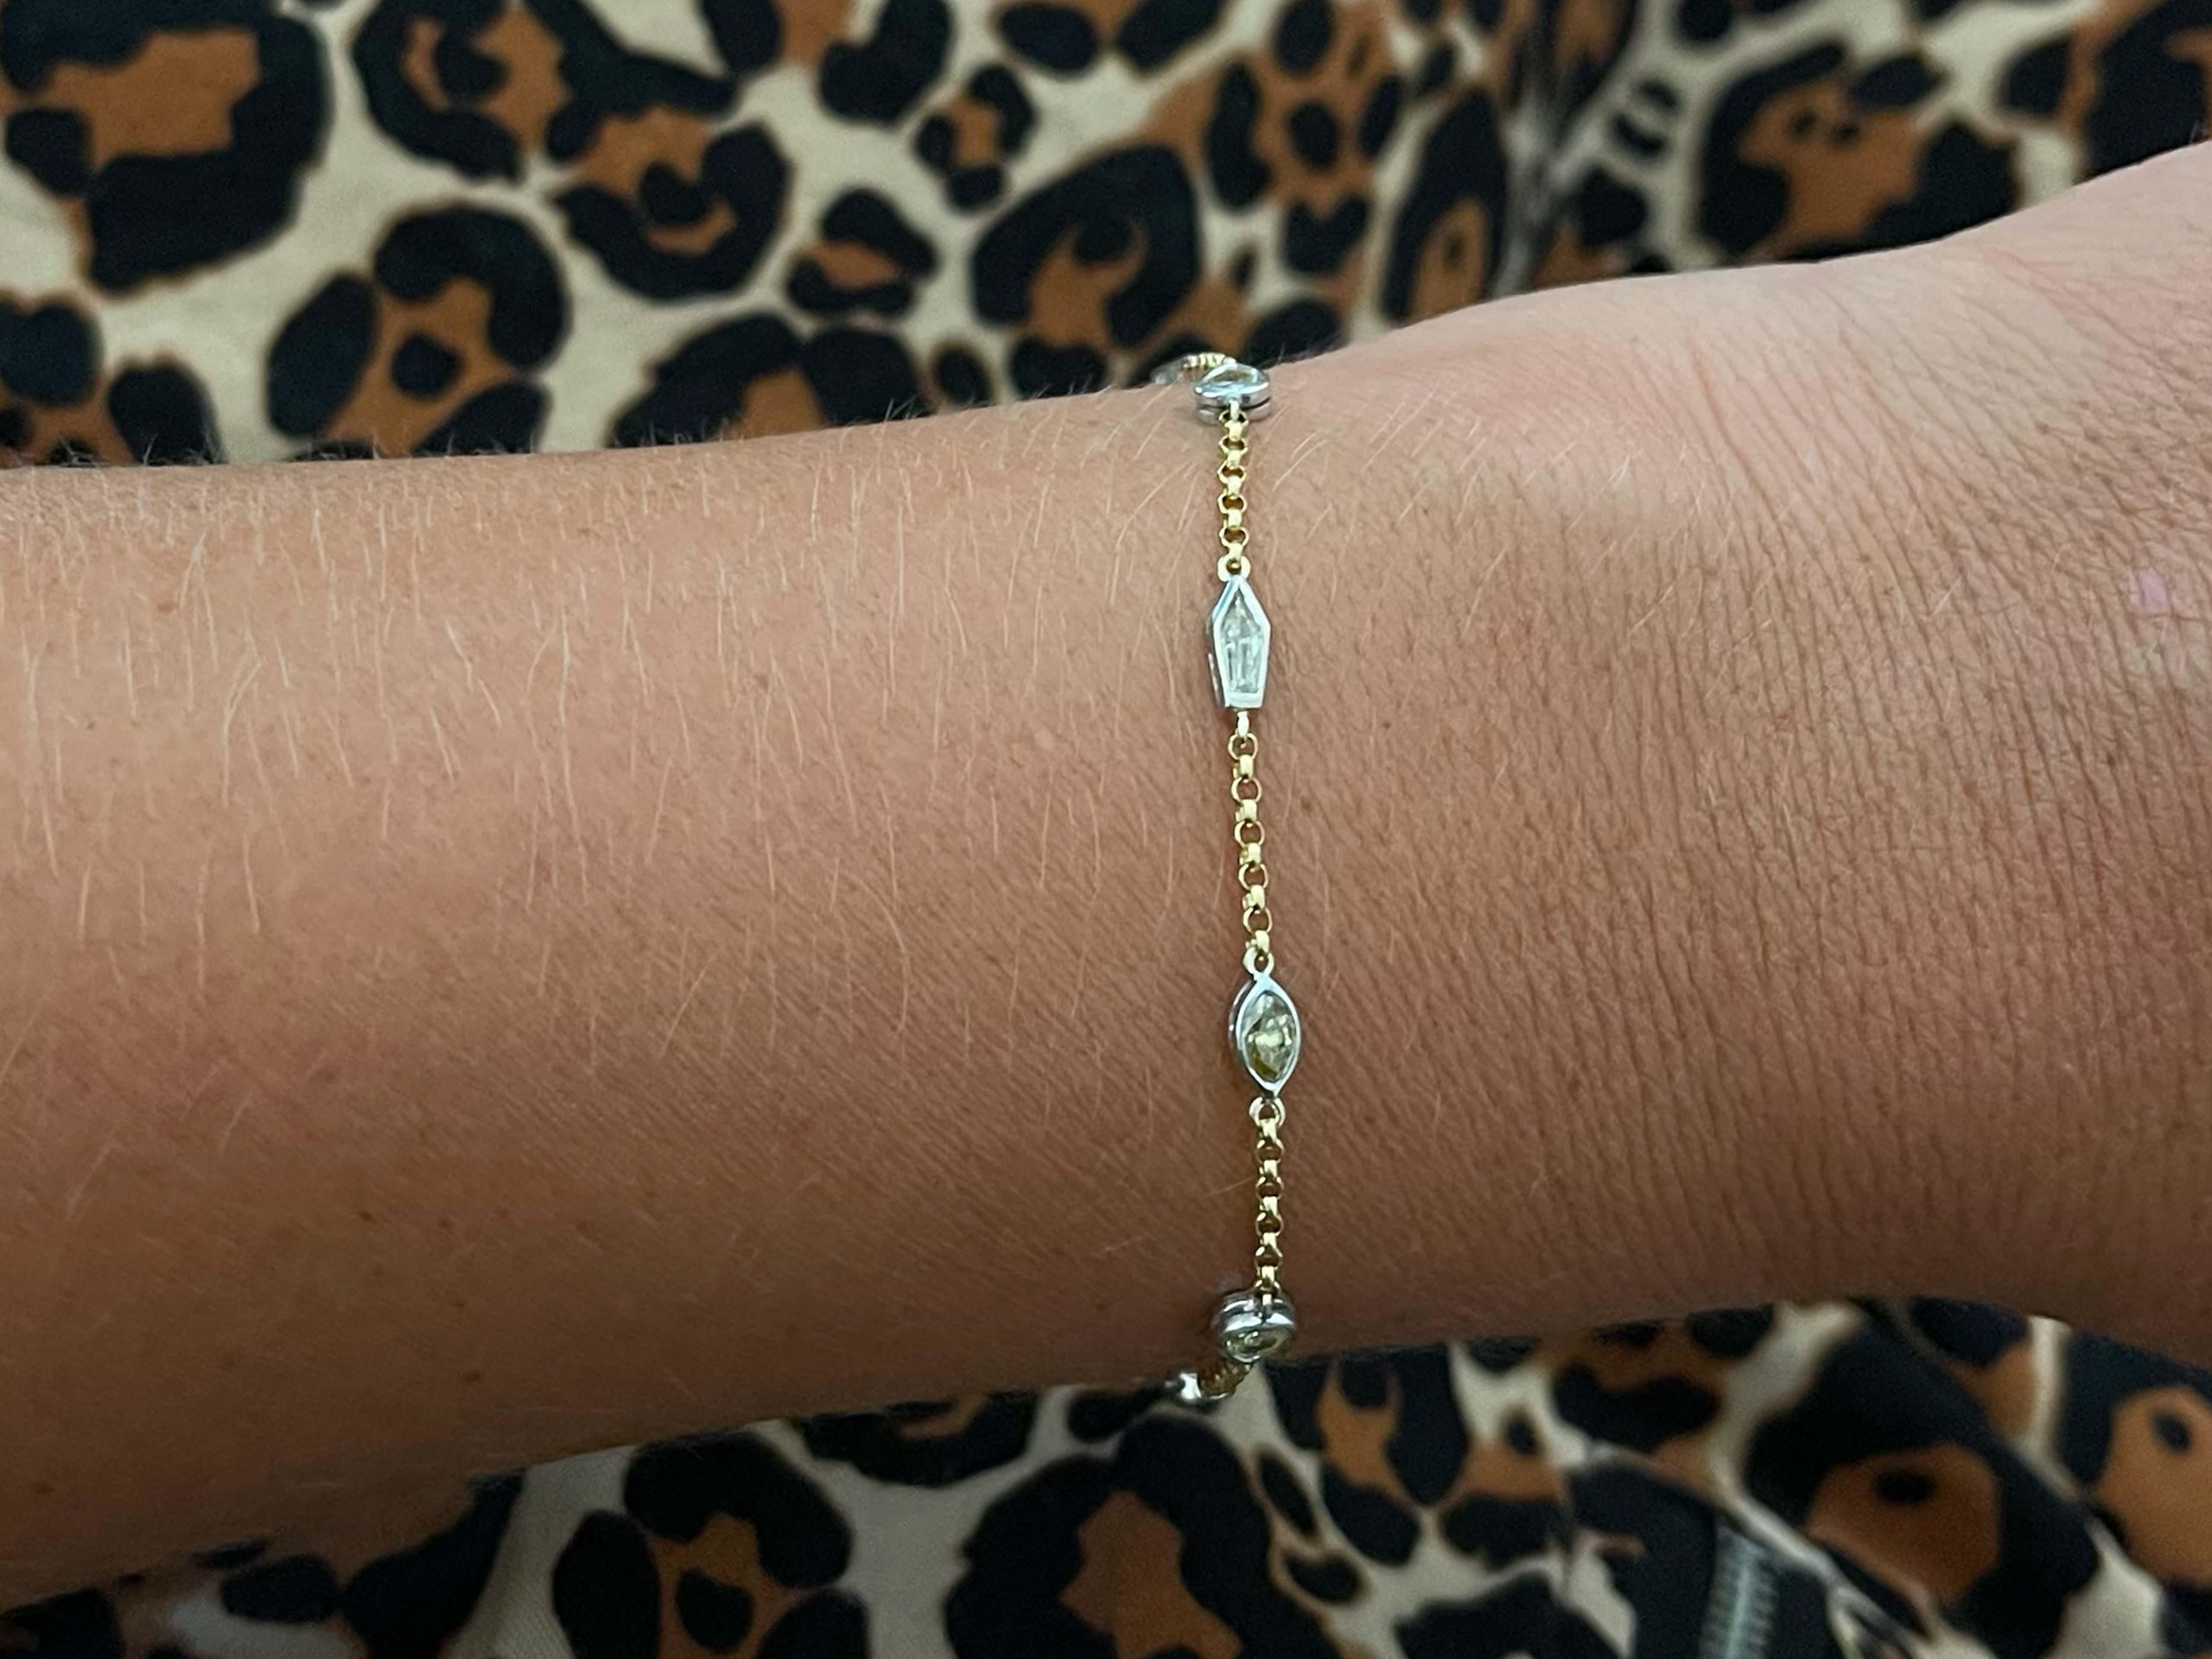 Bracelet Specifications:

Metal: 18k Yellow and White Gold

Diamond Carat Weight: 1.50

Diamond Color: fancy yellow, fancy cognac and white diamonds

Diamond Shape: pear, heart, marquise and bullet

Bracelet Length: ~7.25